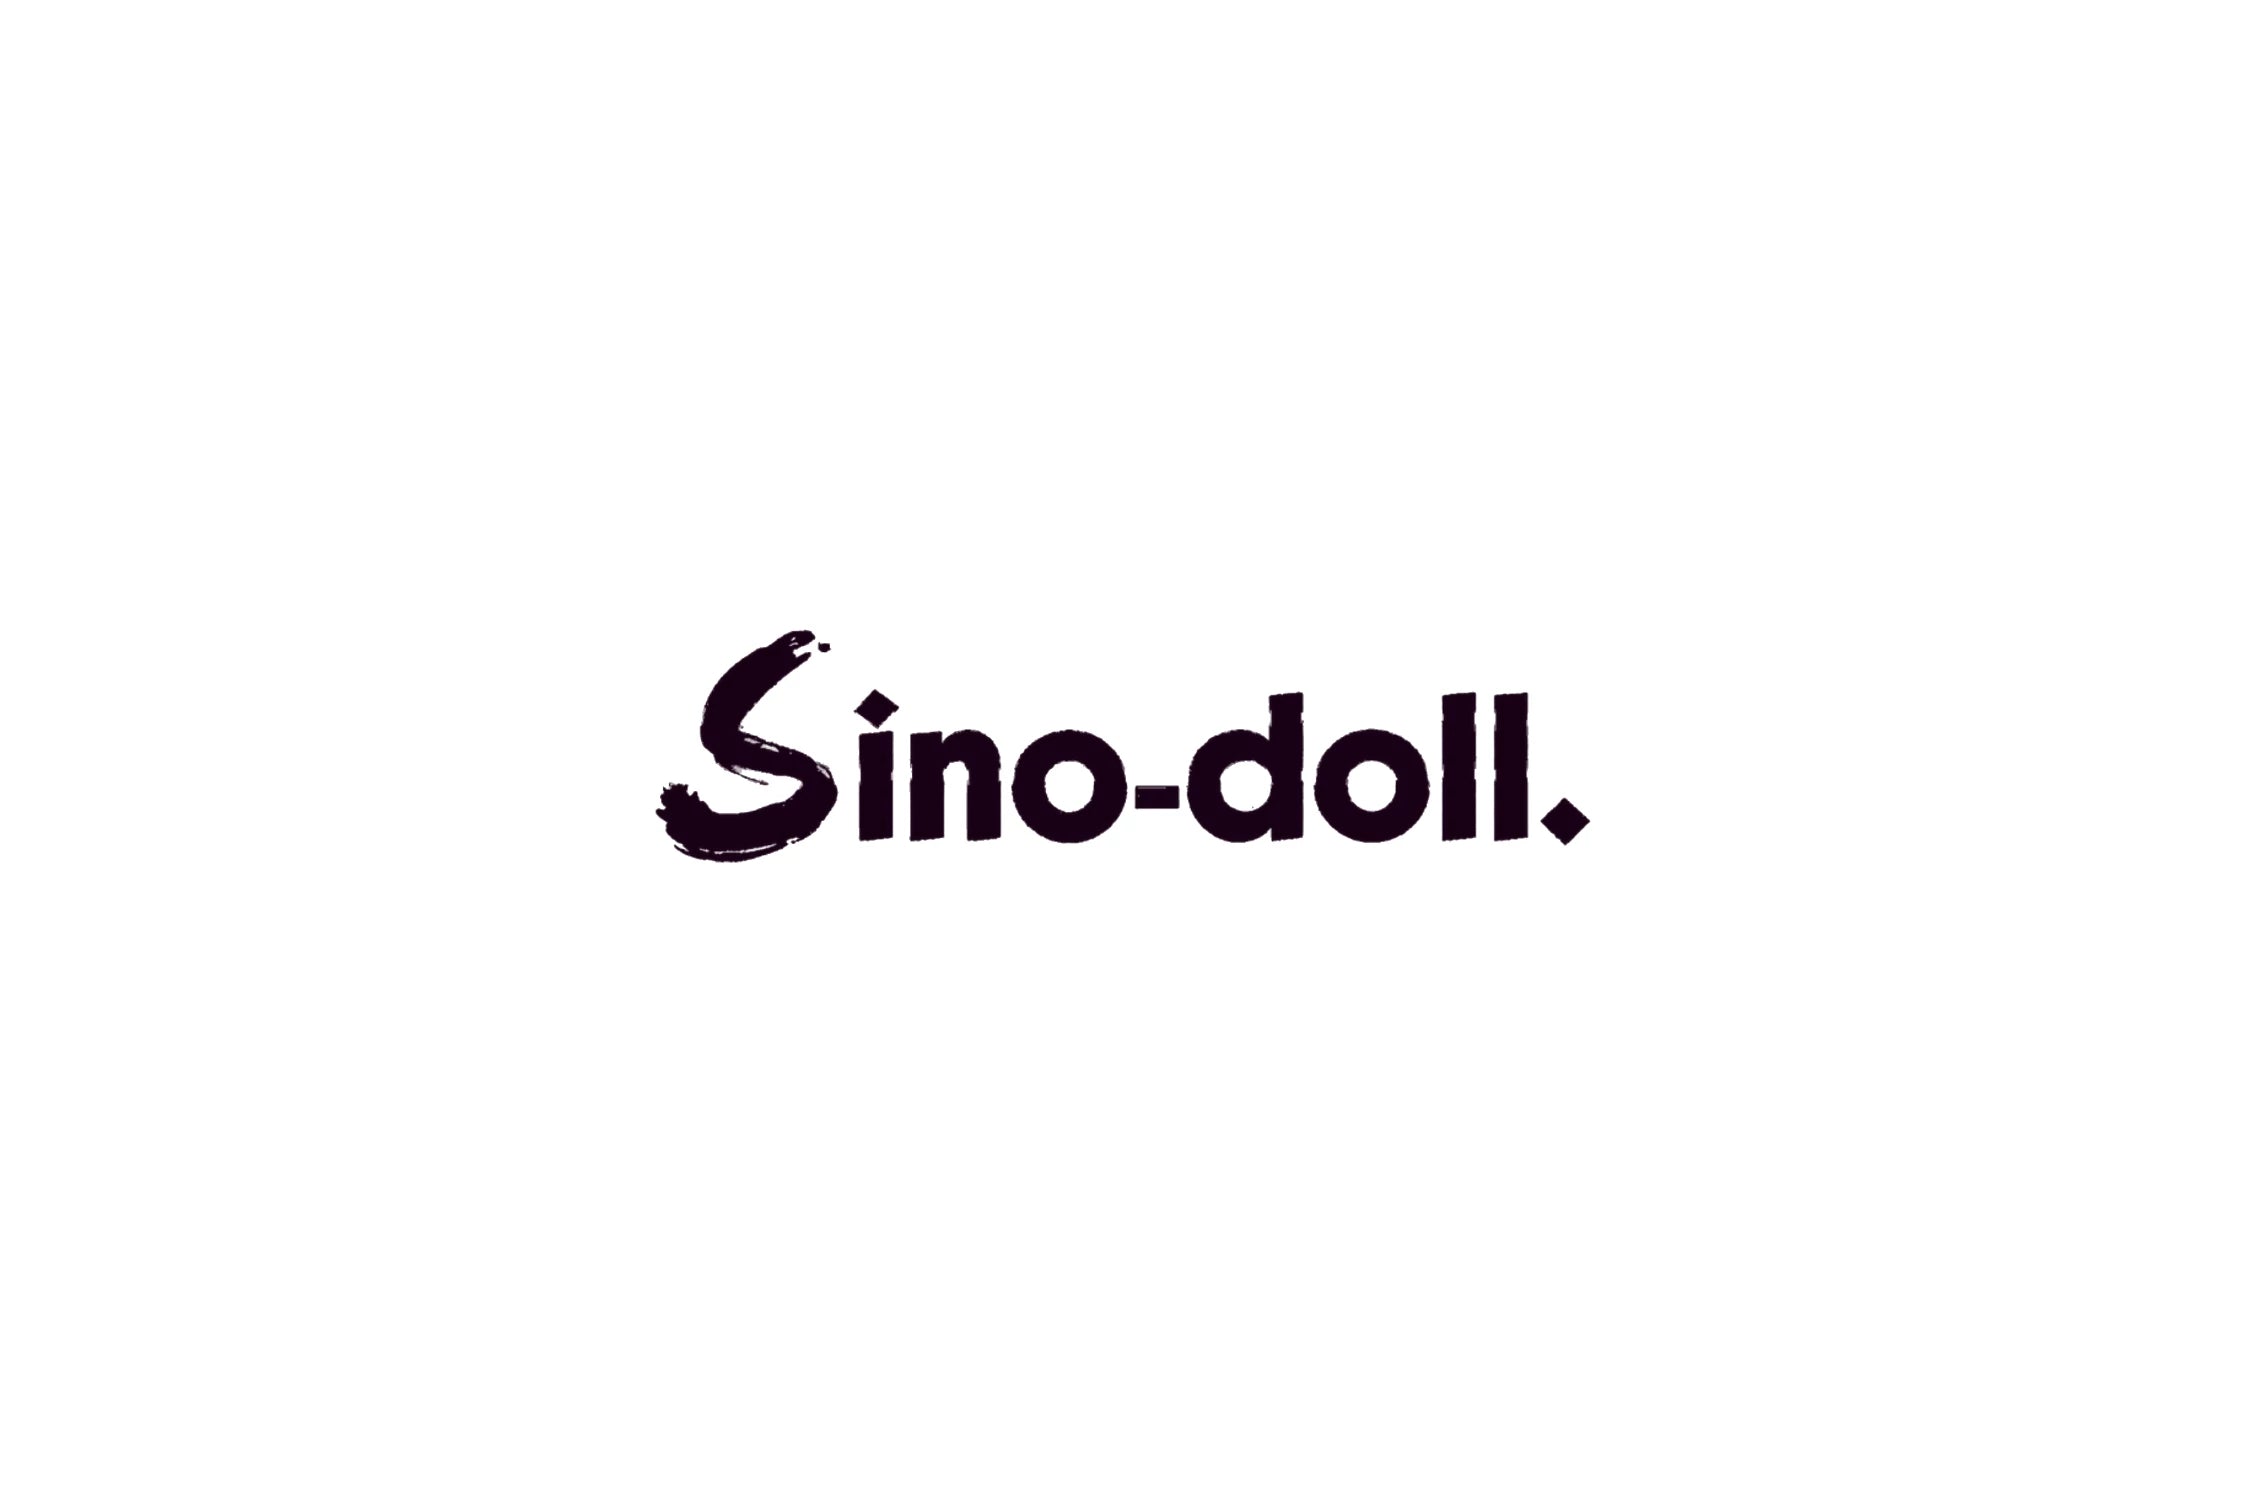 Sino Doll is the Manufacturer of one of the Most Realistic Dolls in the World.